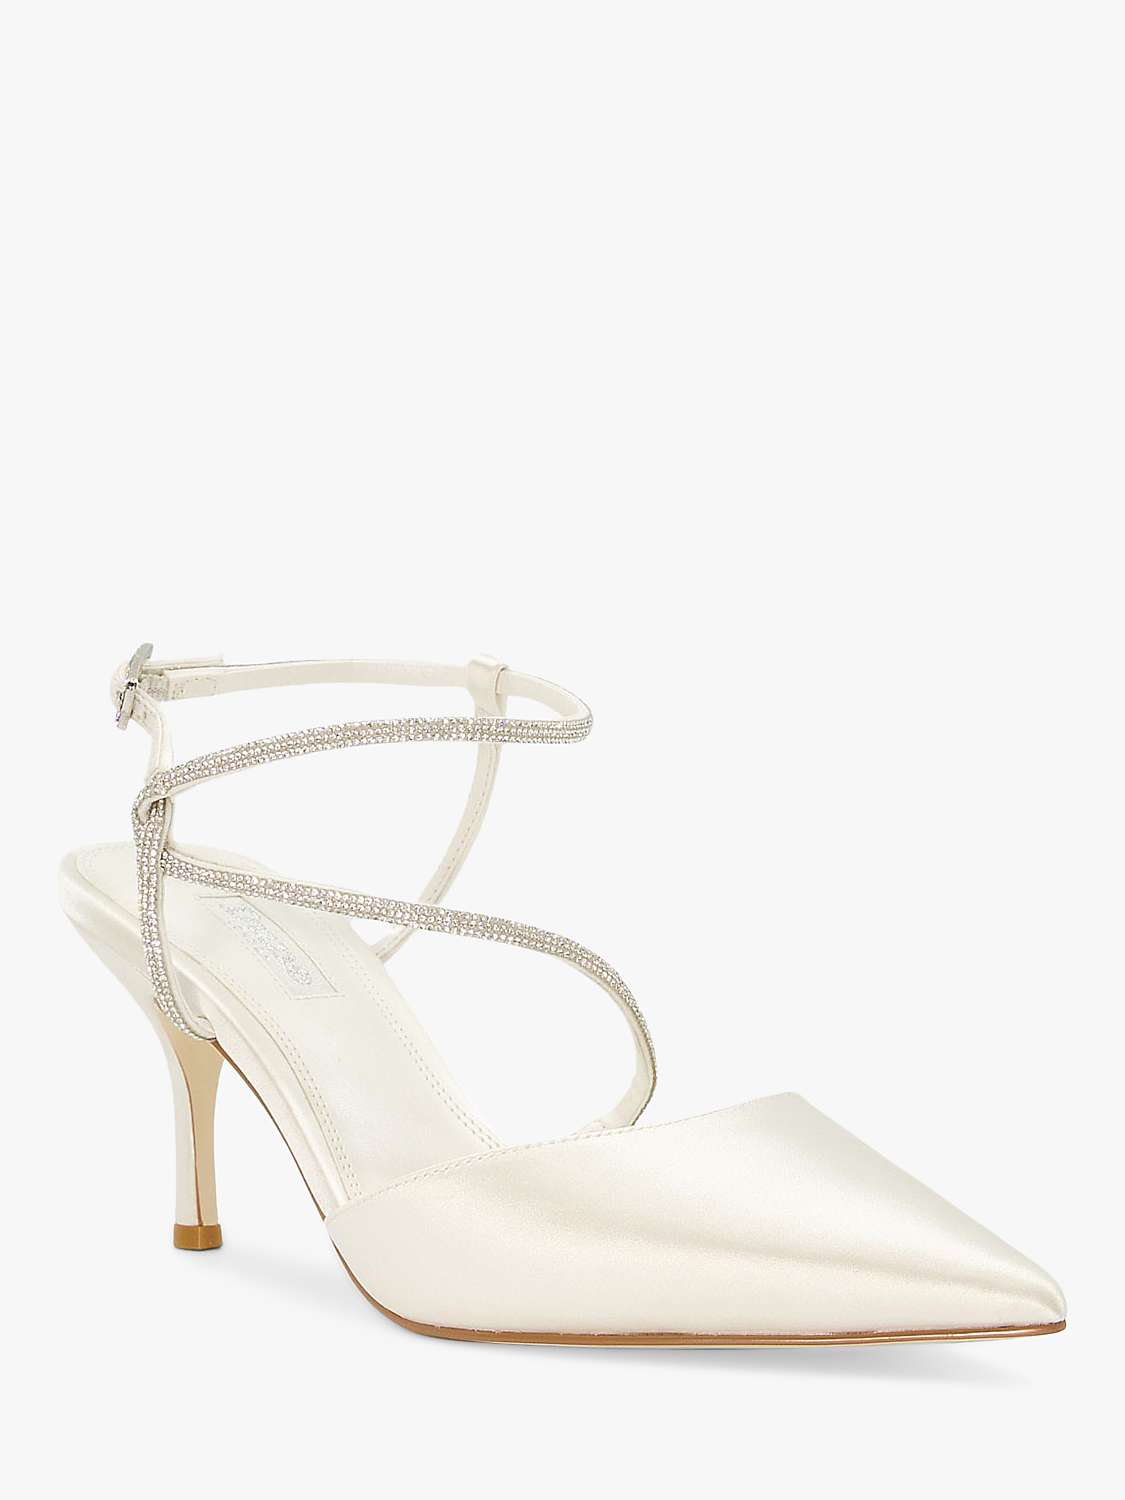 Dune Bridal Collection Clarrise Satin Court Shoes, Ivory at John Lewis ...